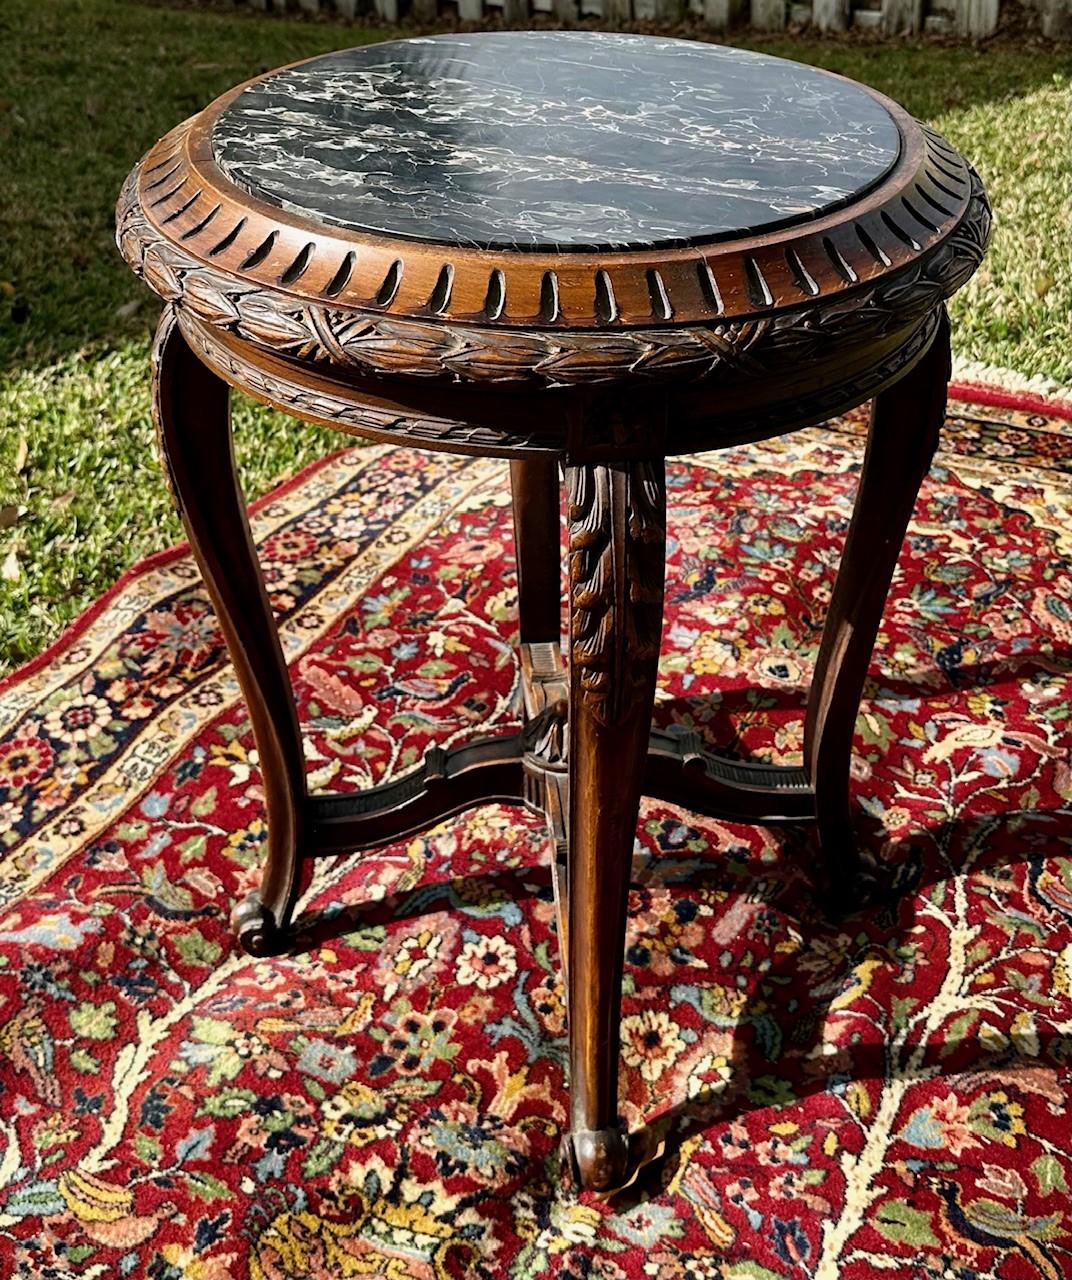 19th Century French Regence Style Round Marble Top Side Table.

This French 19th Century table features ornate carving and a round marble inset top.  The beautiful black marble is accented with gold and white veining. The walnut table stands on four